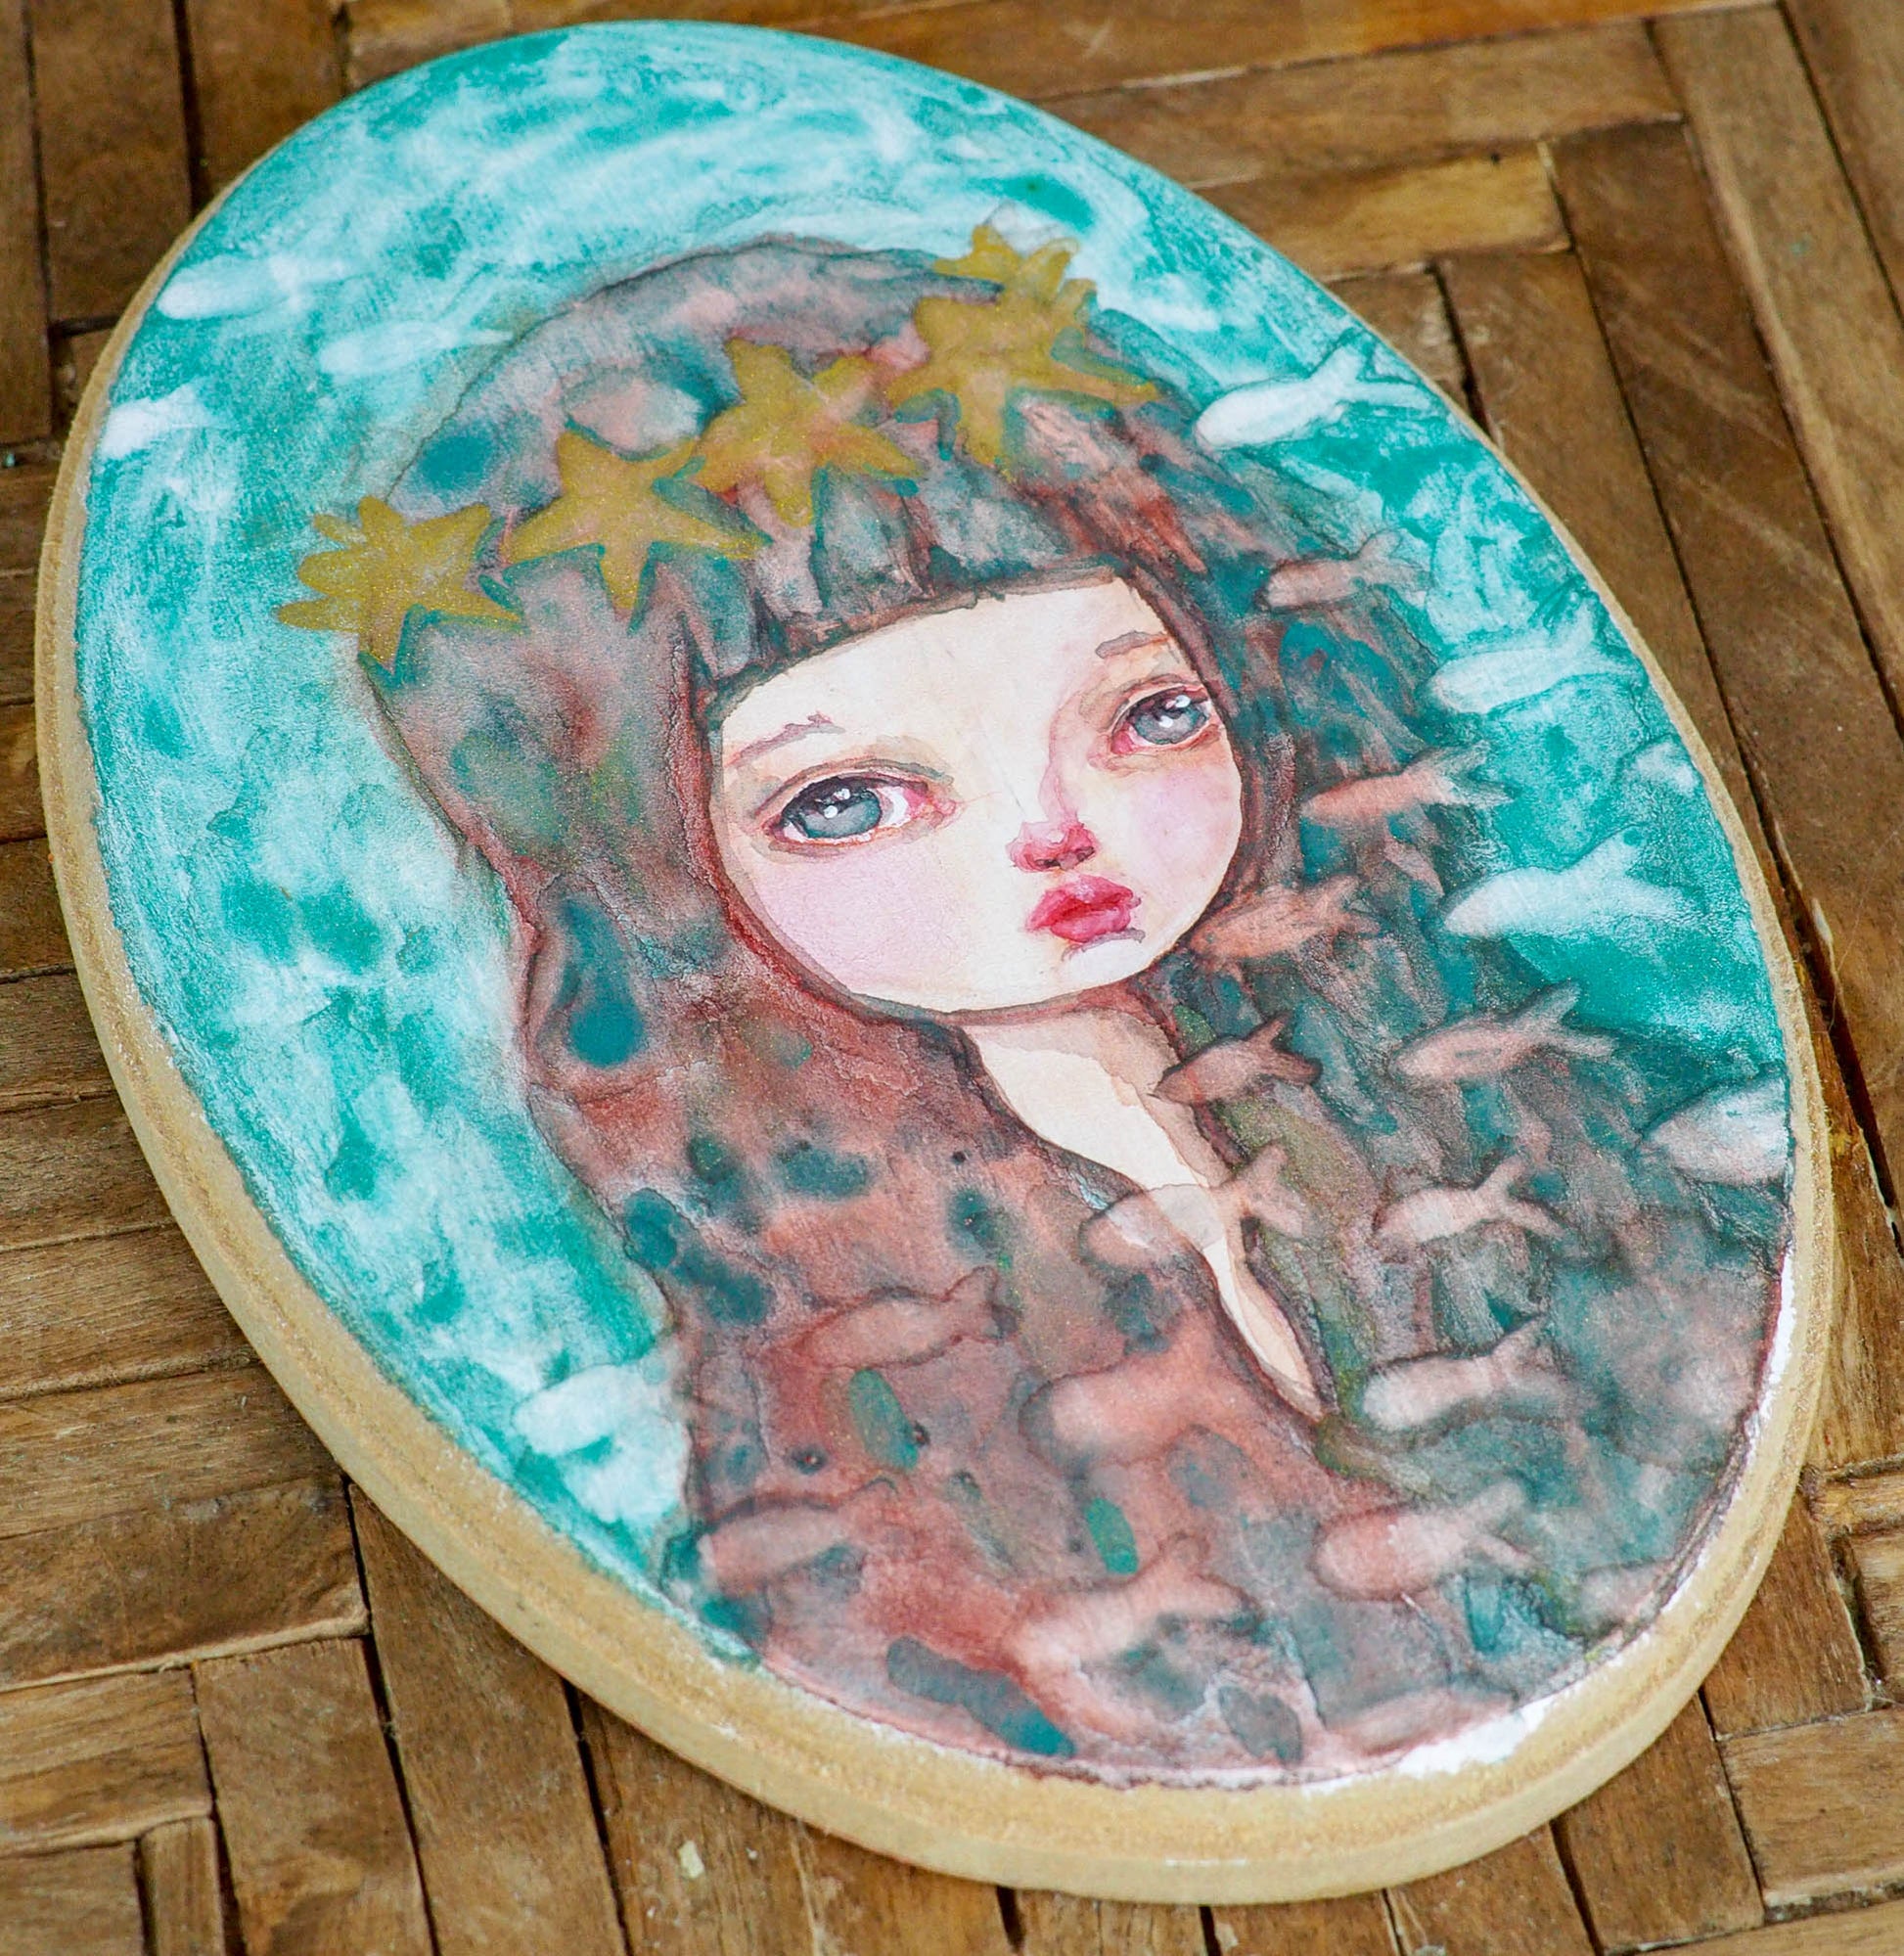 Mermaids are part of danita's painting repertoire, I love painting them! I am painting lots of watercolors now due my lack of space, but that has not stopped my creativity! I got a few oval wood panels and I have been using them to paint original watercolor paintings and illustration.